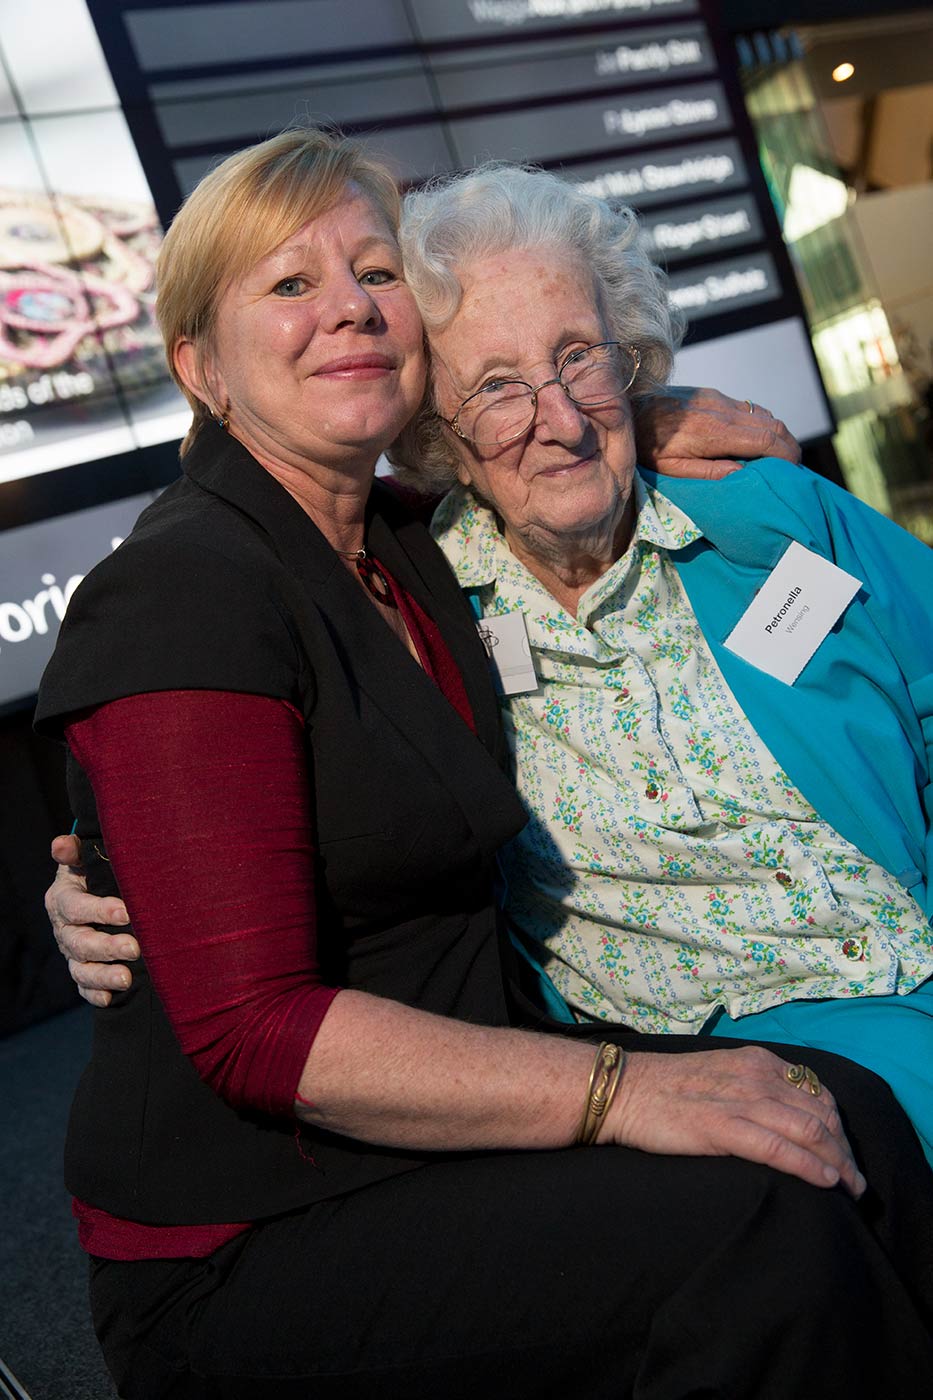 Museum donor Petronella Wensing, with her daughter Veronica, at the launch of the Museum Donor Honour Board, November 2013.